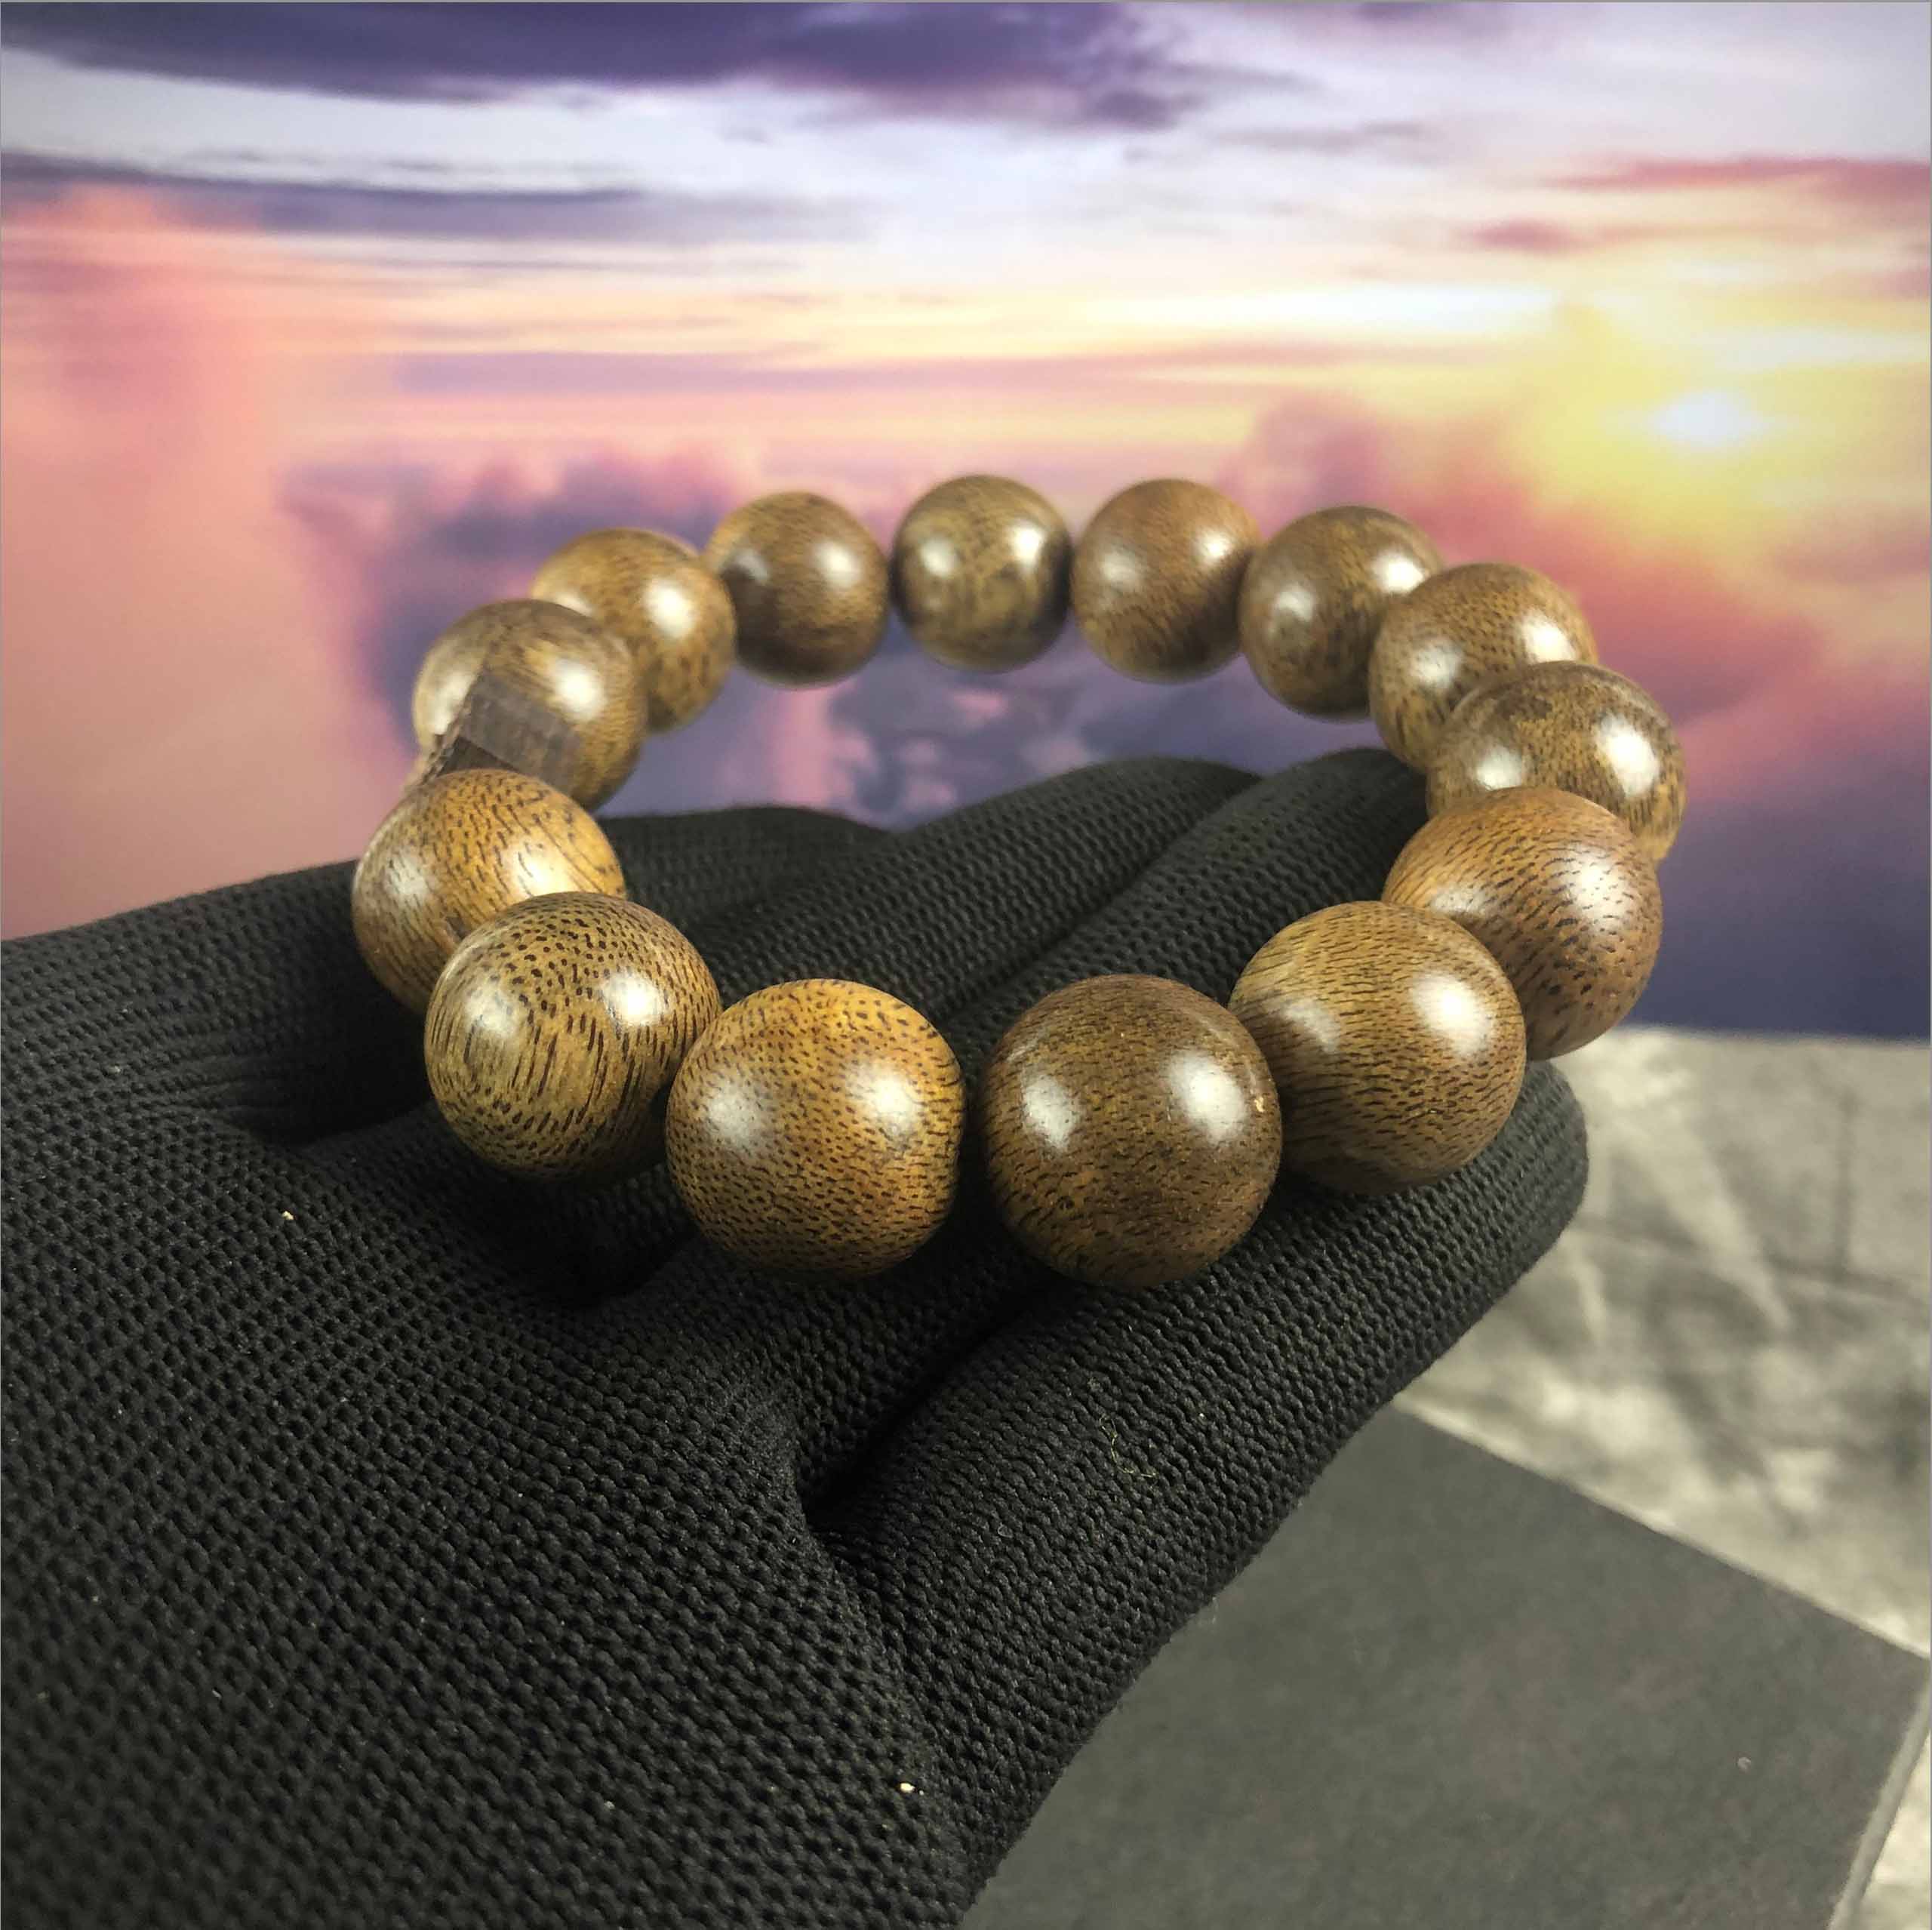 Agarwood bracelet 16 cups 14 round beads with a touch of flowers - VT92LHFA